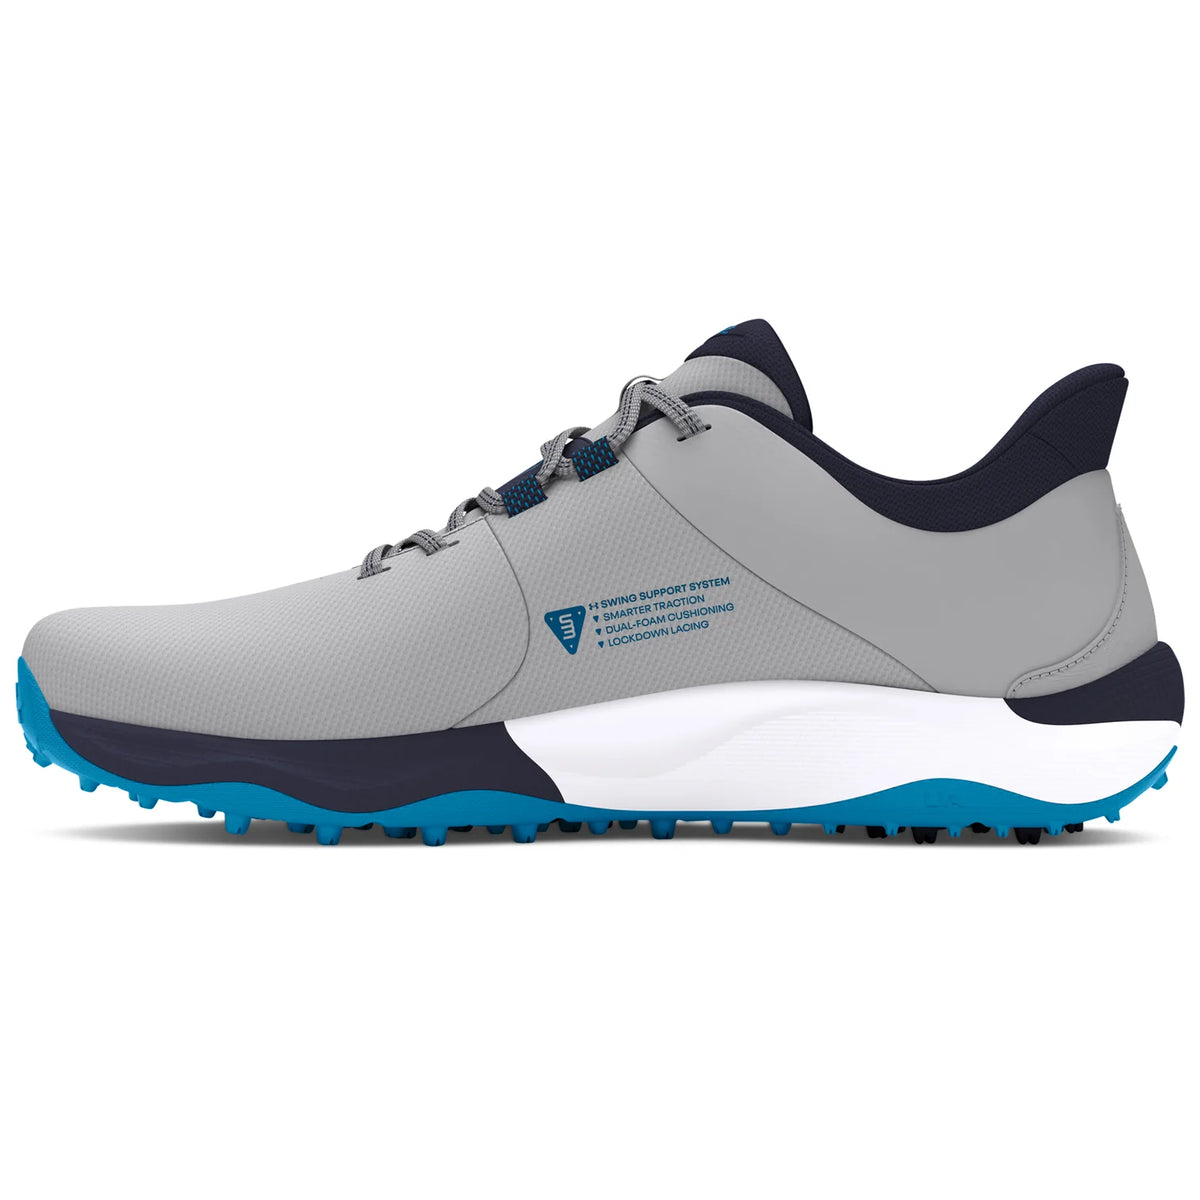 Under Armour Drive Fade SL Wide